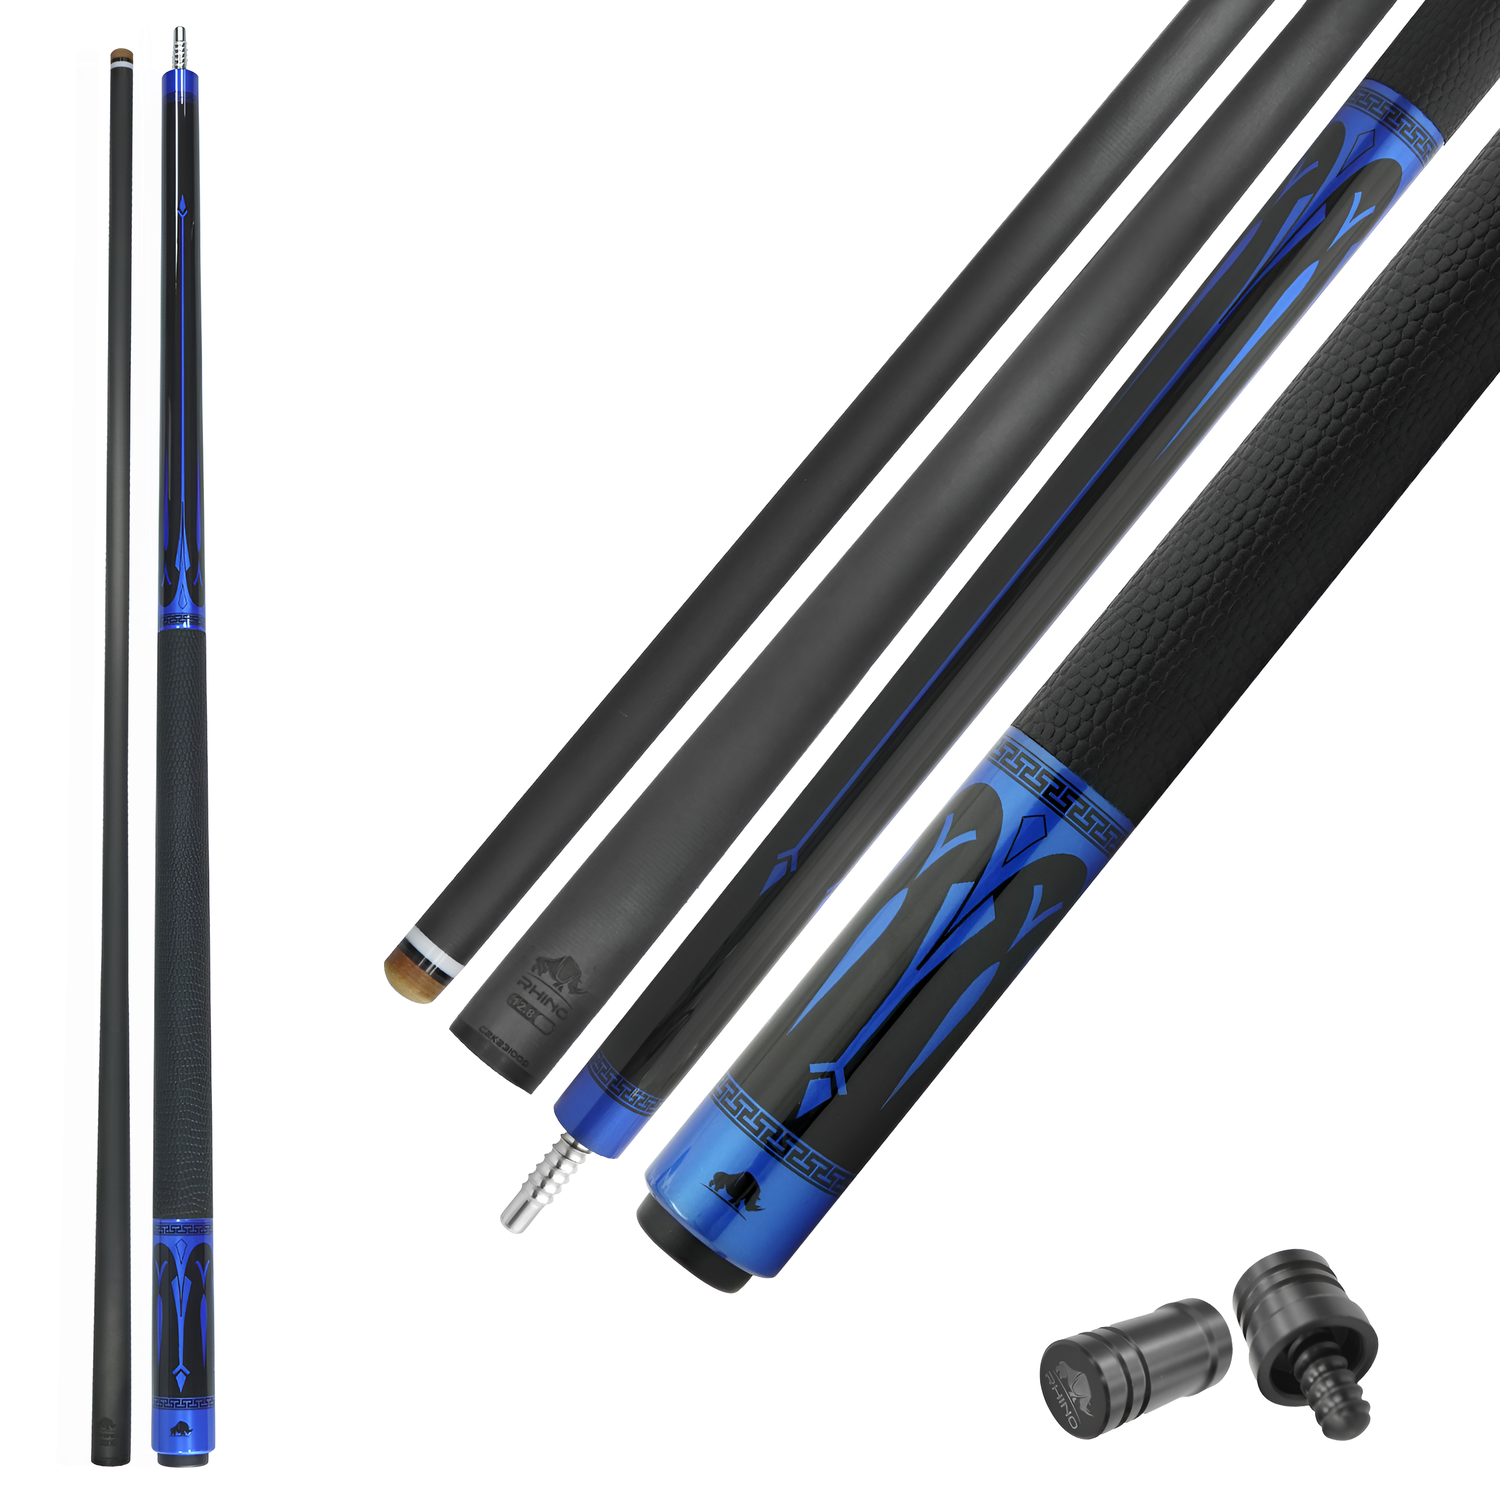 ECLIPSE Pool Cue - Blue (3/8-8 Joint) - 12.8 mm Tip Diameter